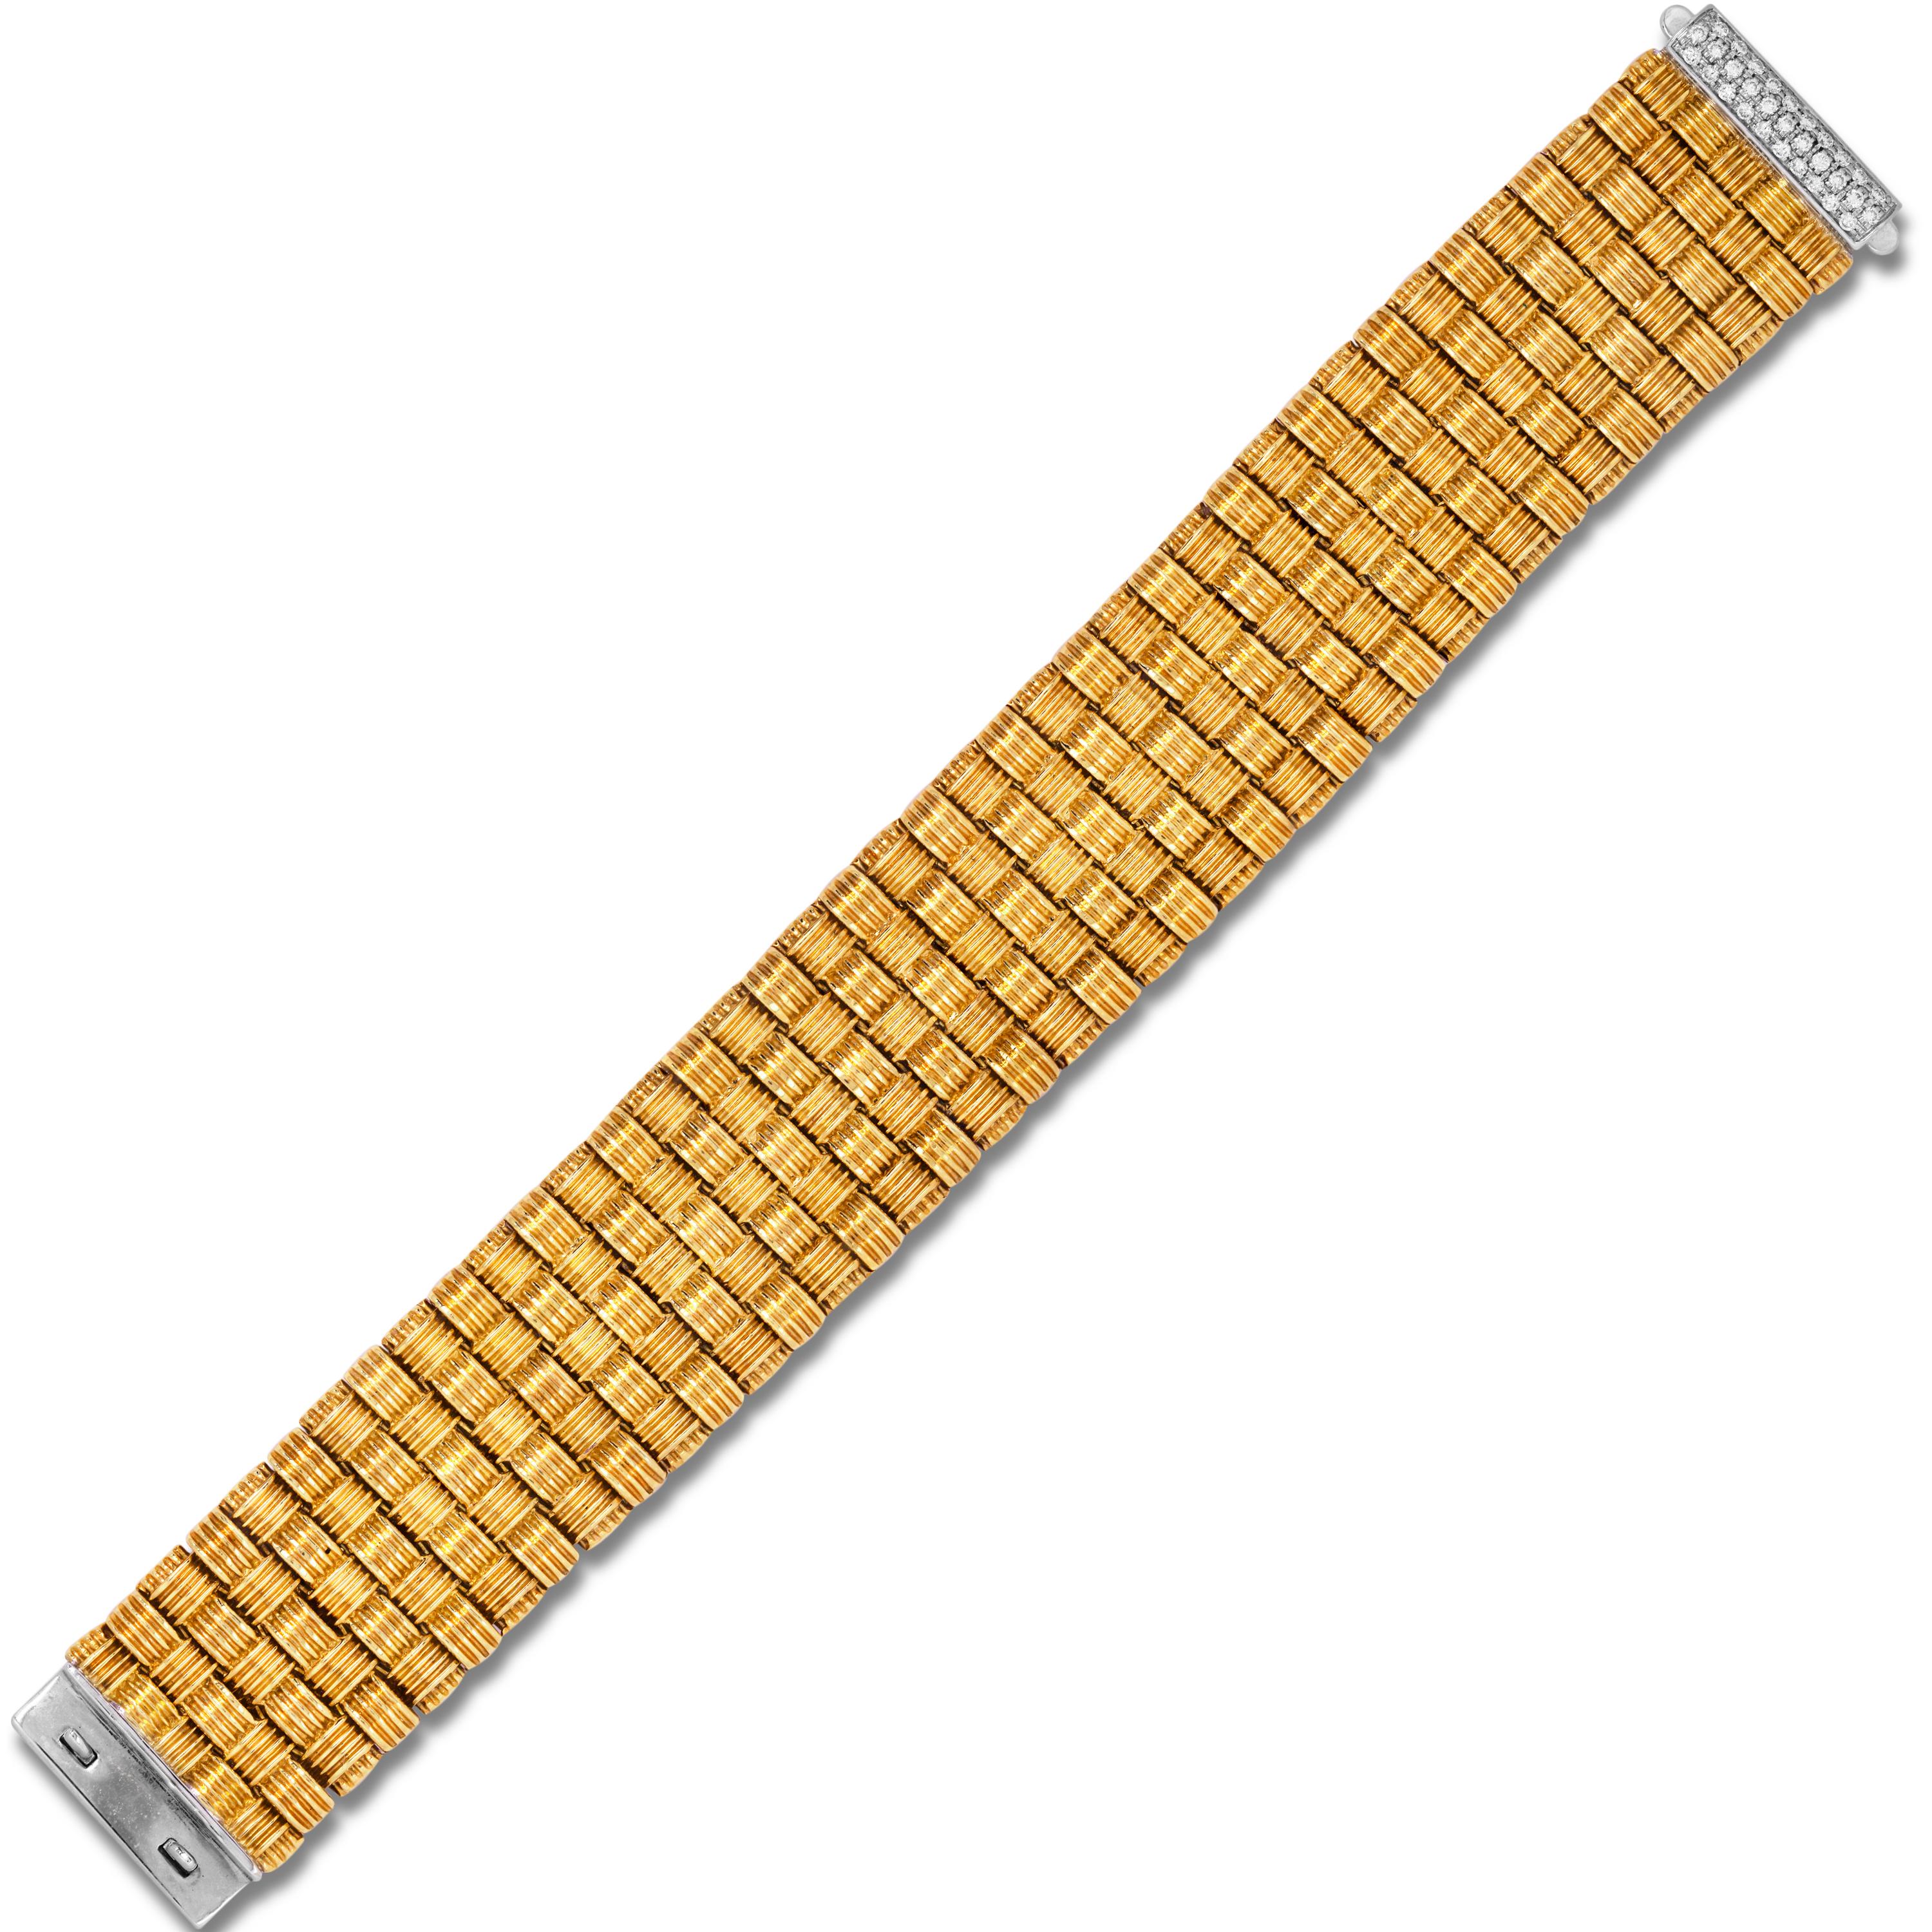 Authentic BRAND NEW Roberto Coin Appassionata 18K Yellow White Gold and Diamond Five Row Bracelet

0.30 carat G color, VS clarity diamonds are set on the center of this bracelet

This bracelet is from the 